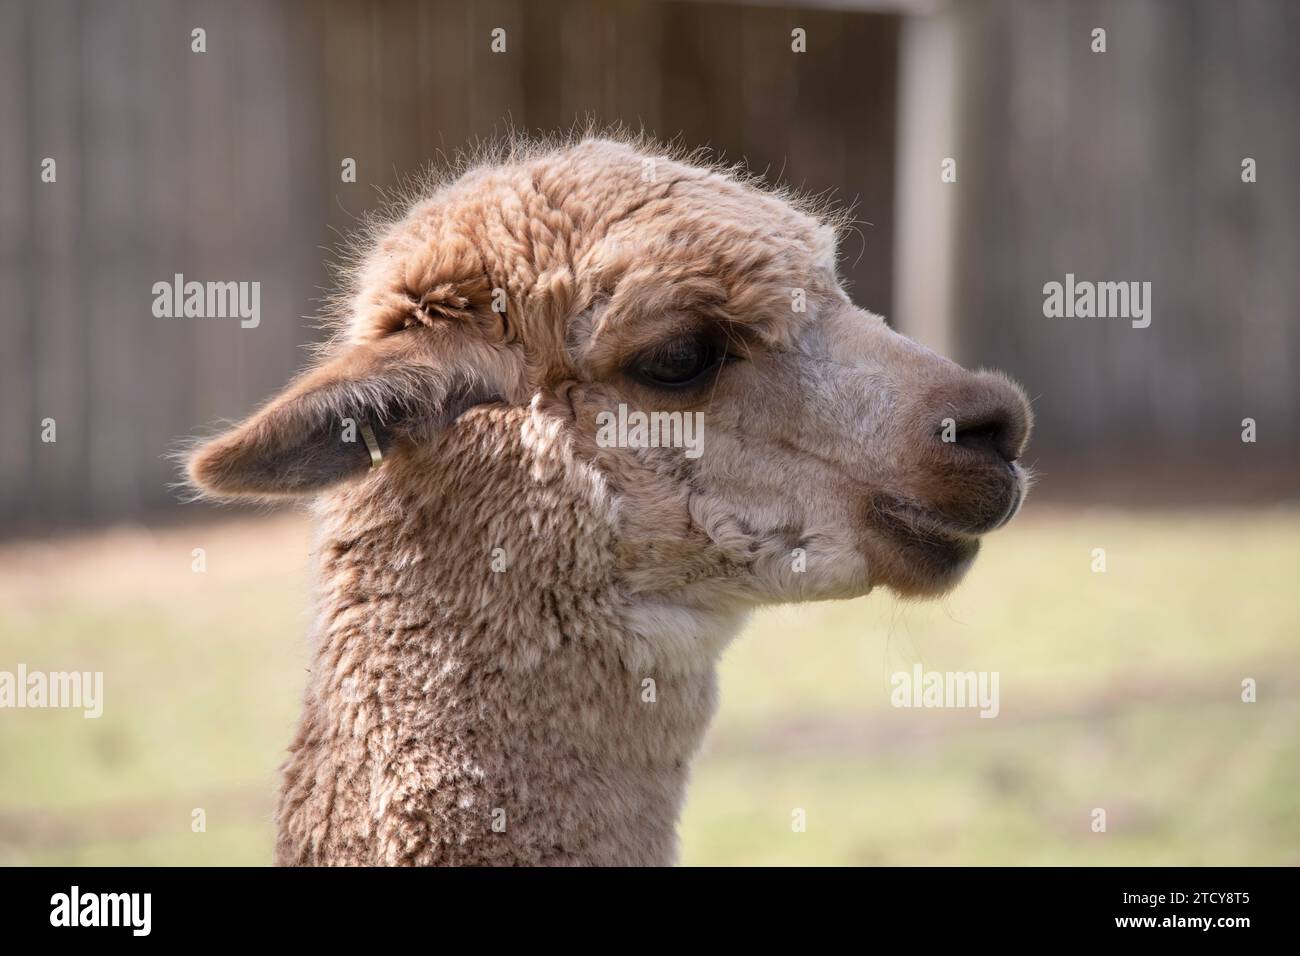 alpaca are slender bodied animals with long legs and neck and small heads and large pointed ears. They are covered in soft fleece Stock Photo